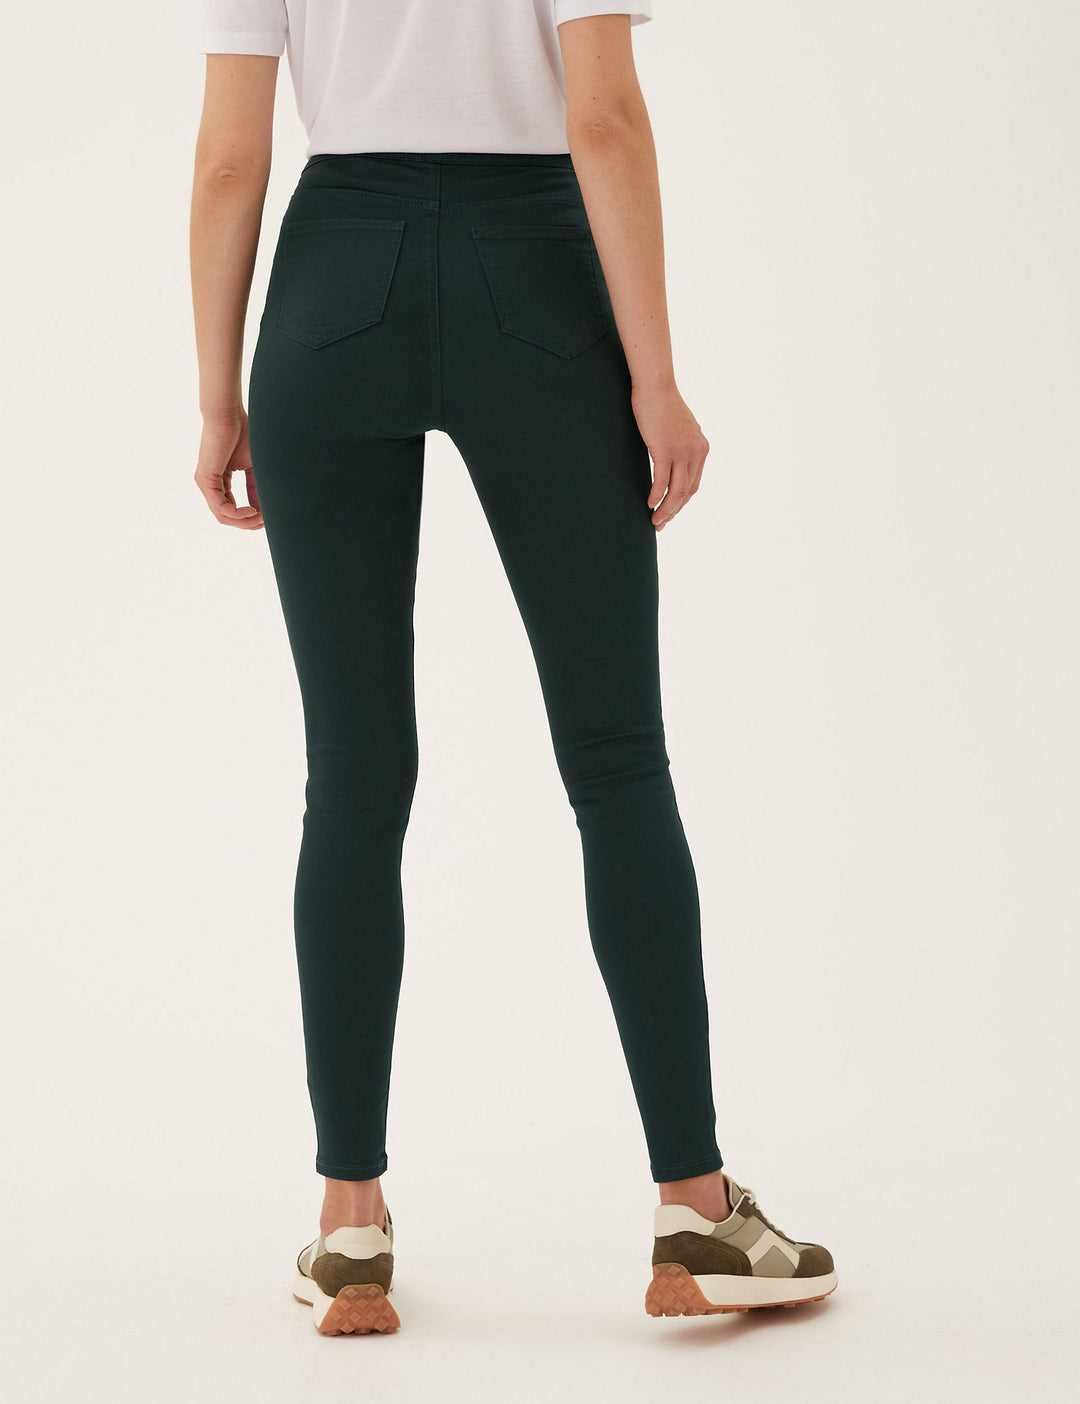 M&S High Rise Jeggings T57/8604